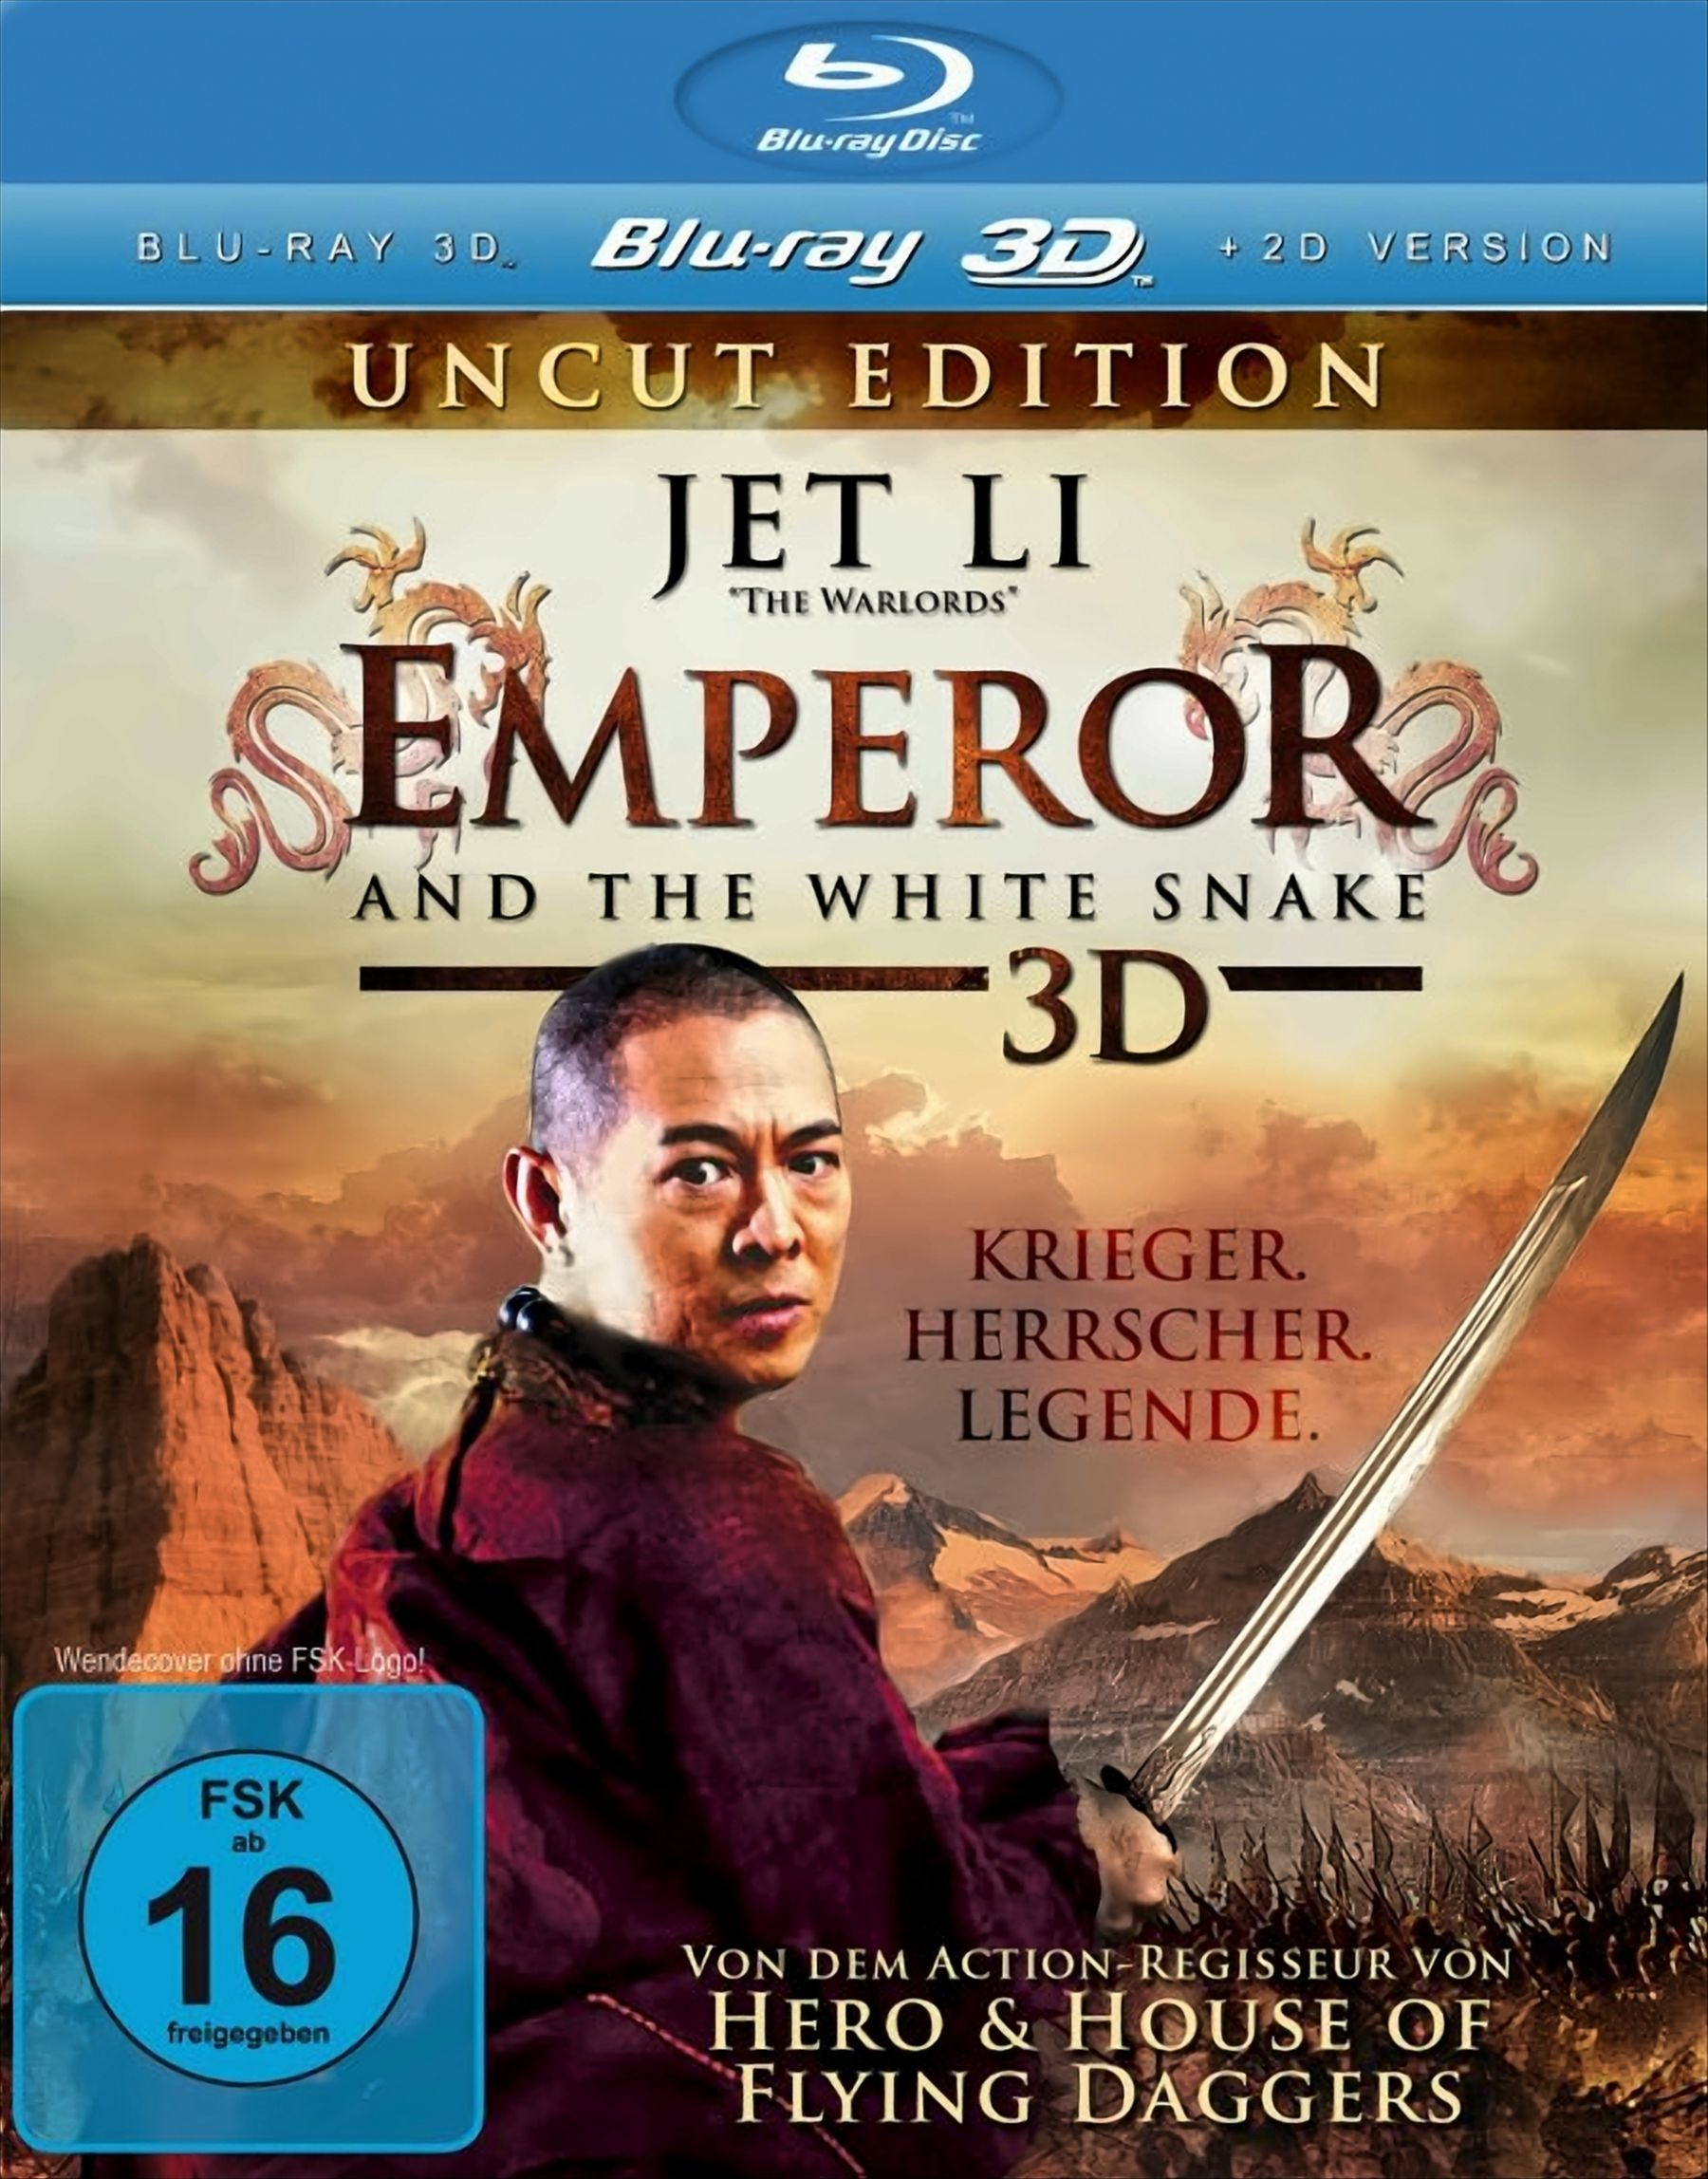 Emperor and the White Edition) Blu-ray Snake 3D, Uncut (Blu-ray